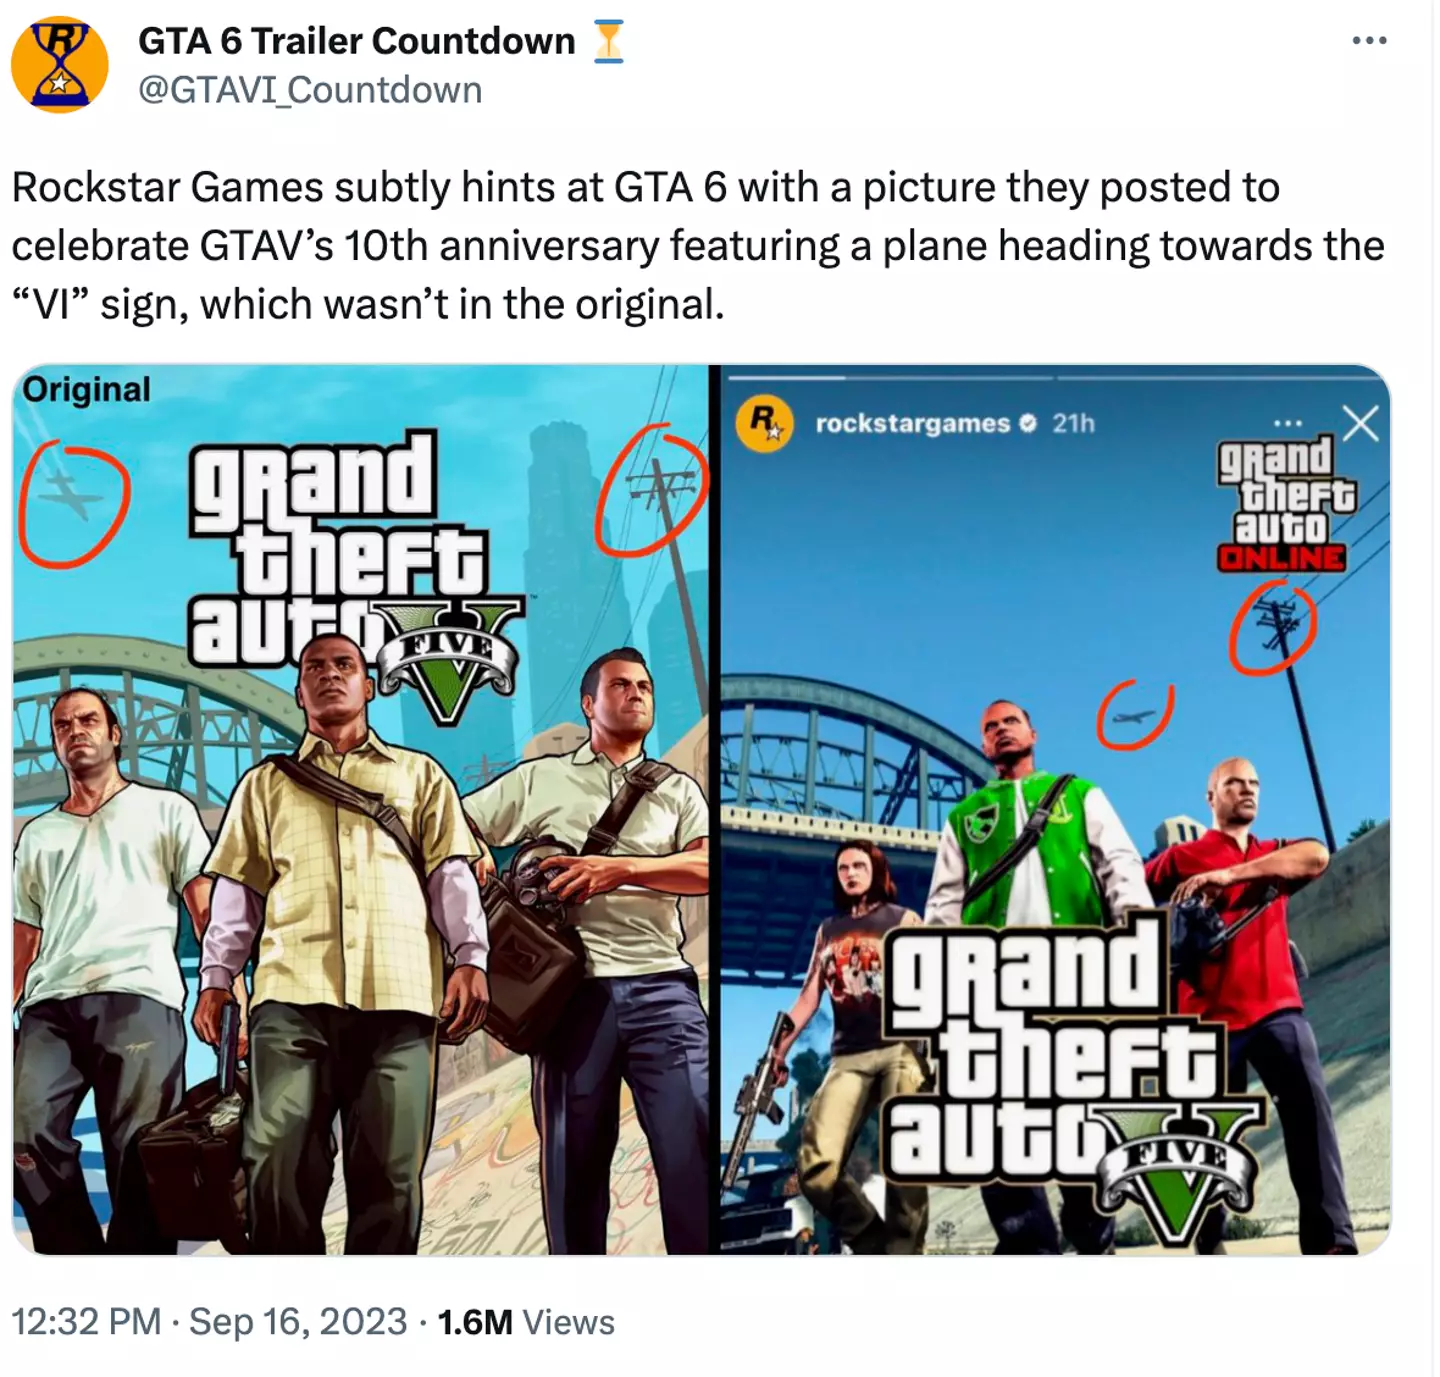 One X user made a case for Rockstar Games teasing the news Grand Theft Auto game.